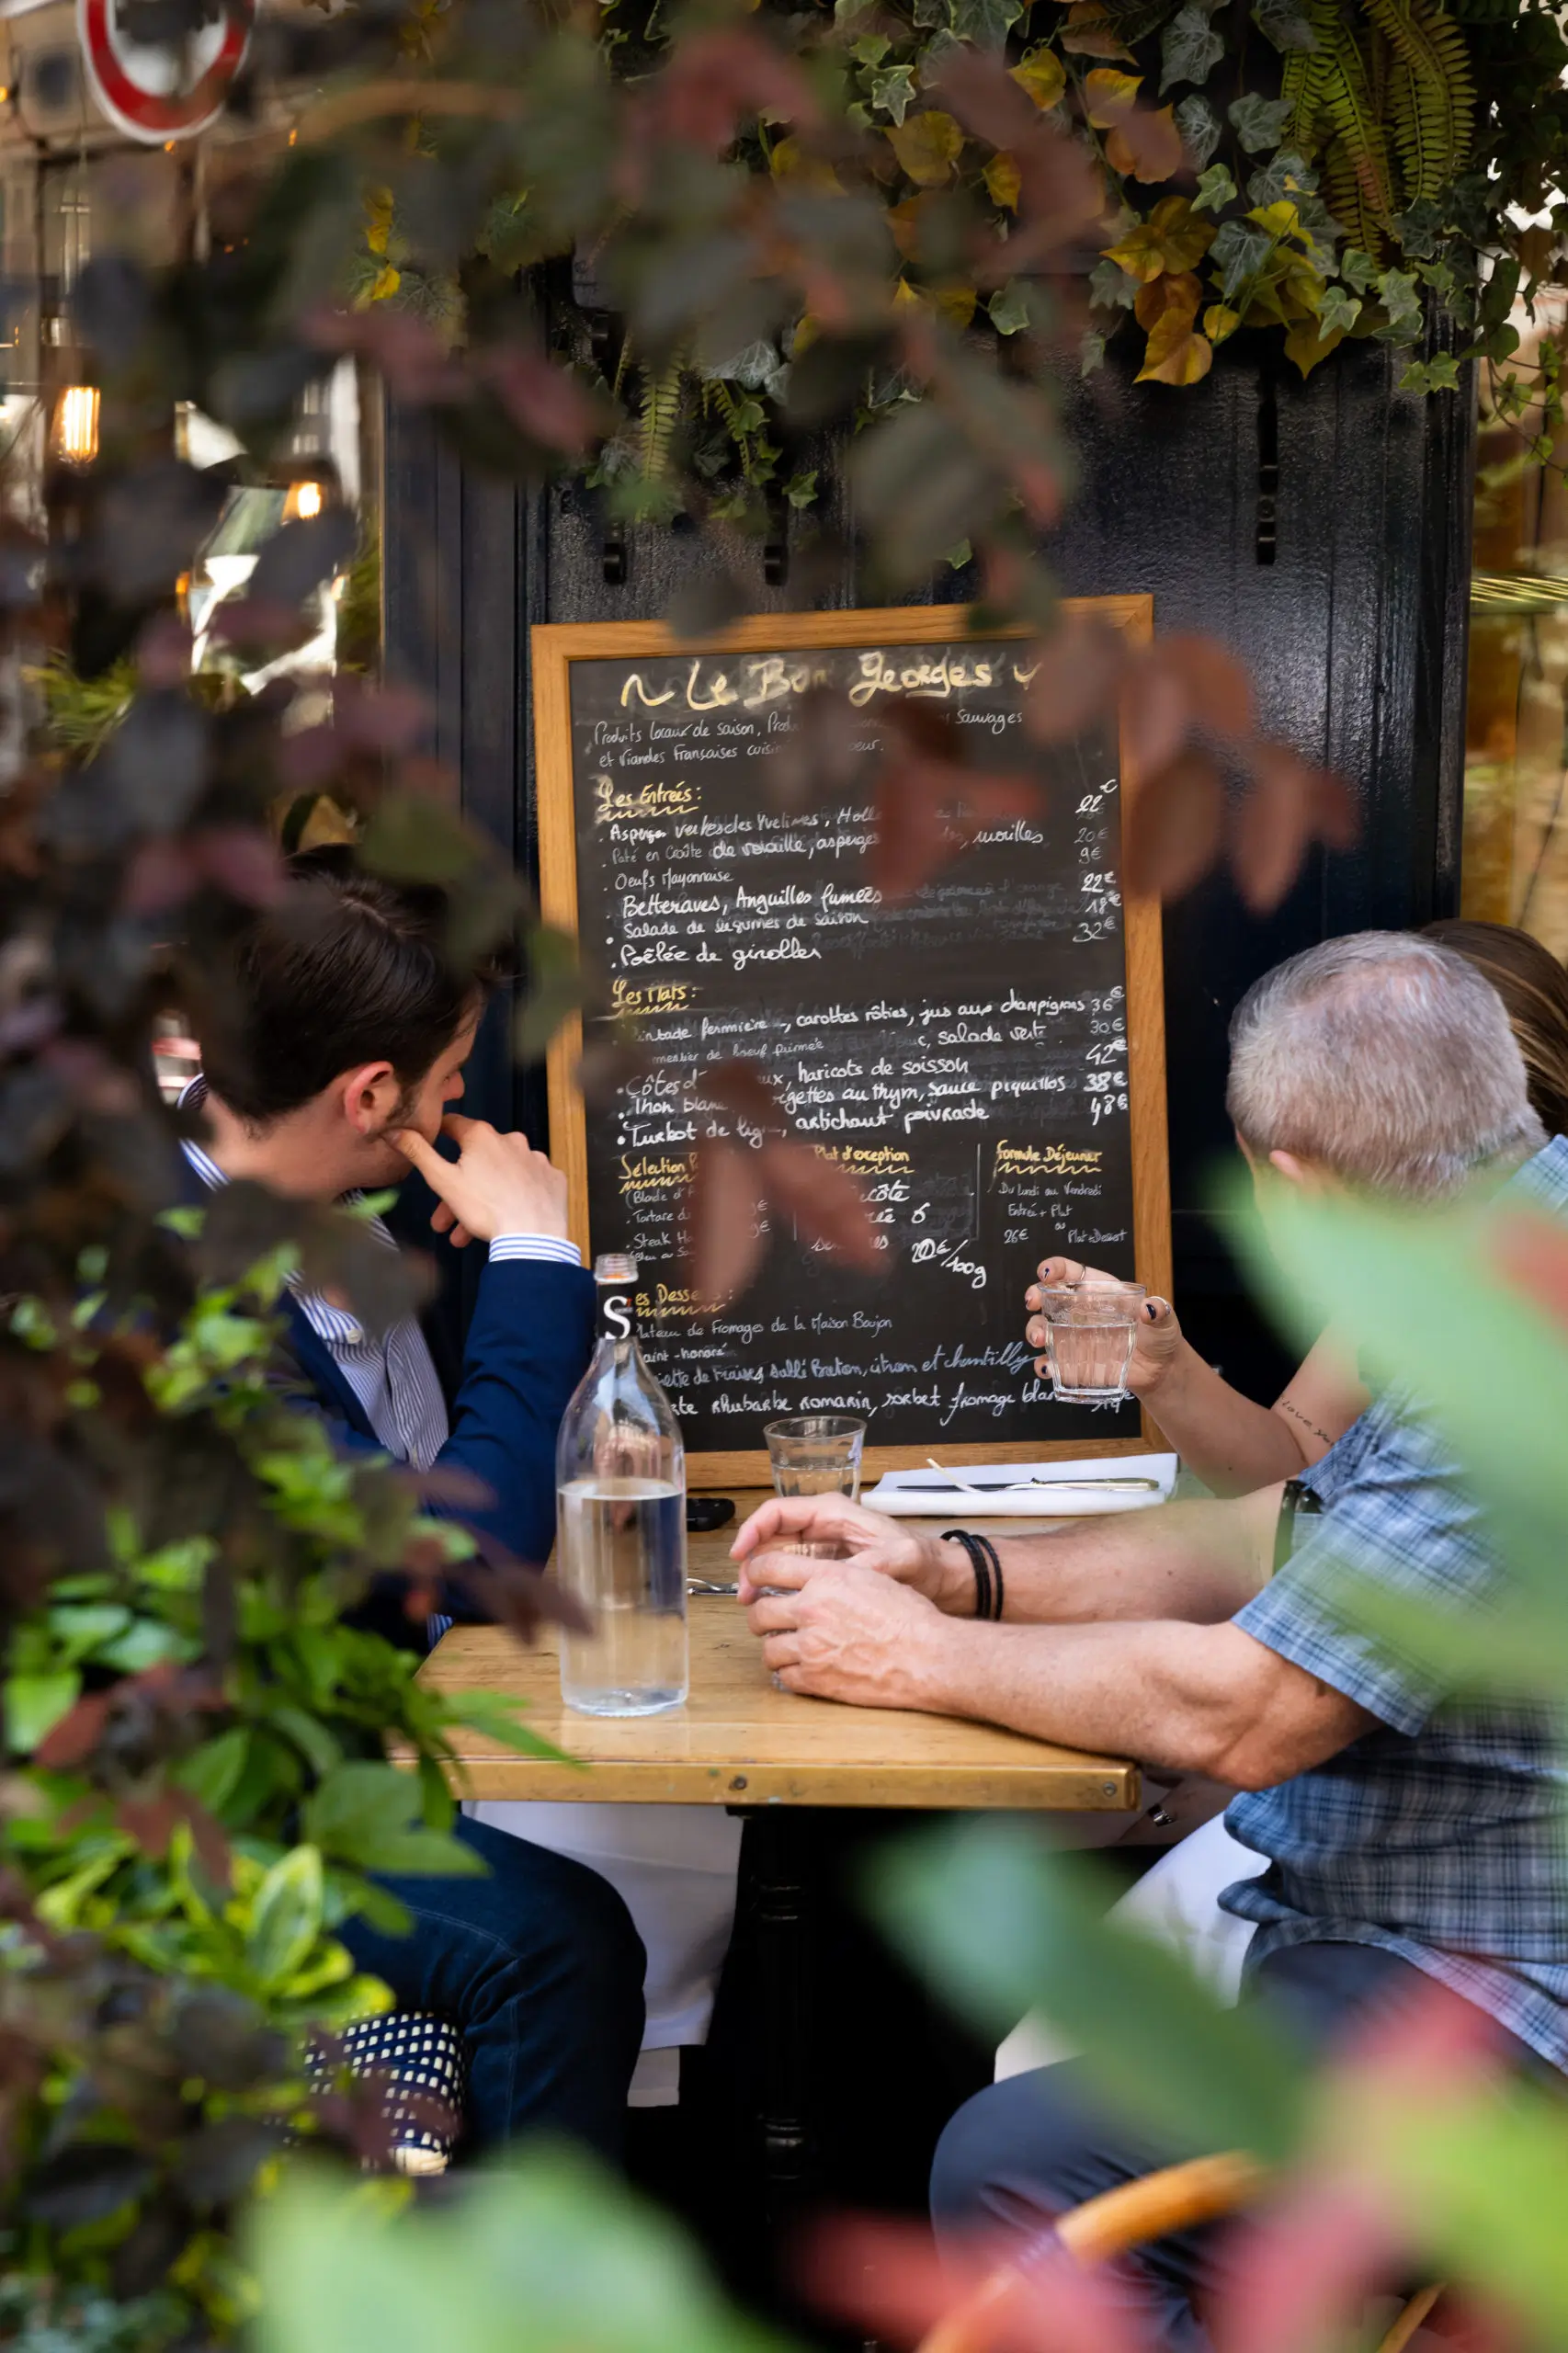 Two customers seated at an outdoor table of Le Bon Georges in Paris, reviewing a chalkboard menu framed by lush greenery.